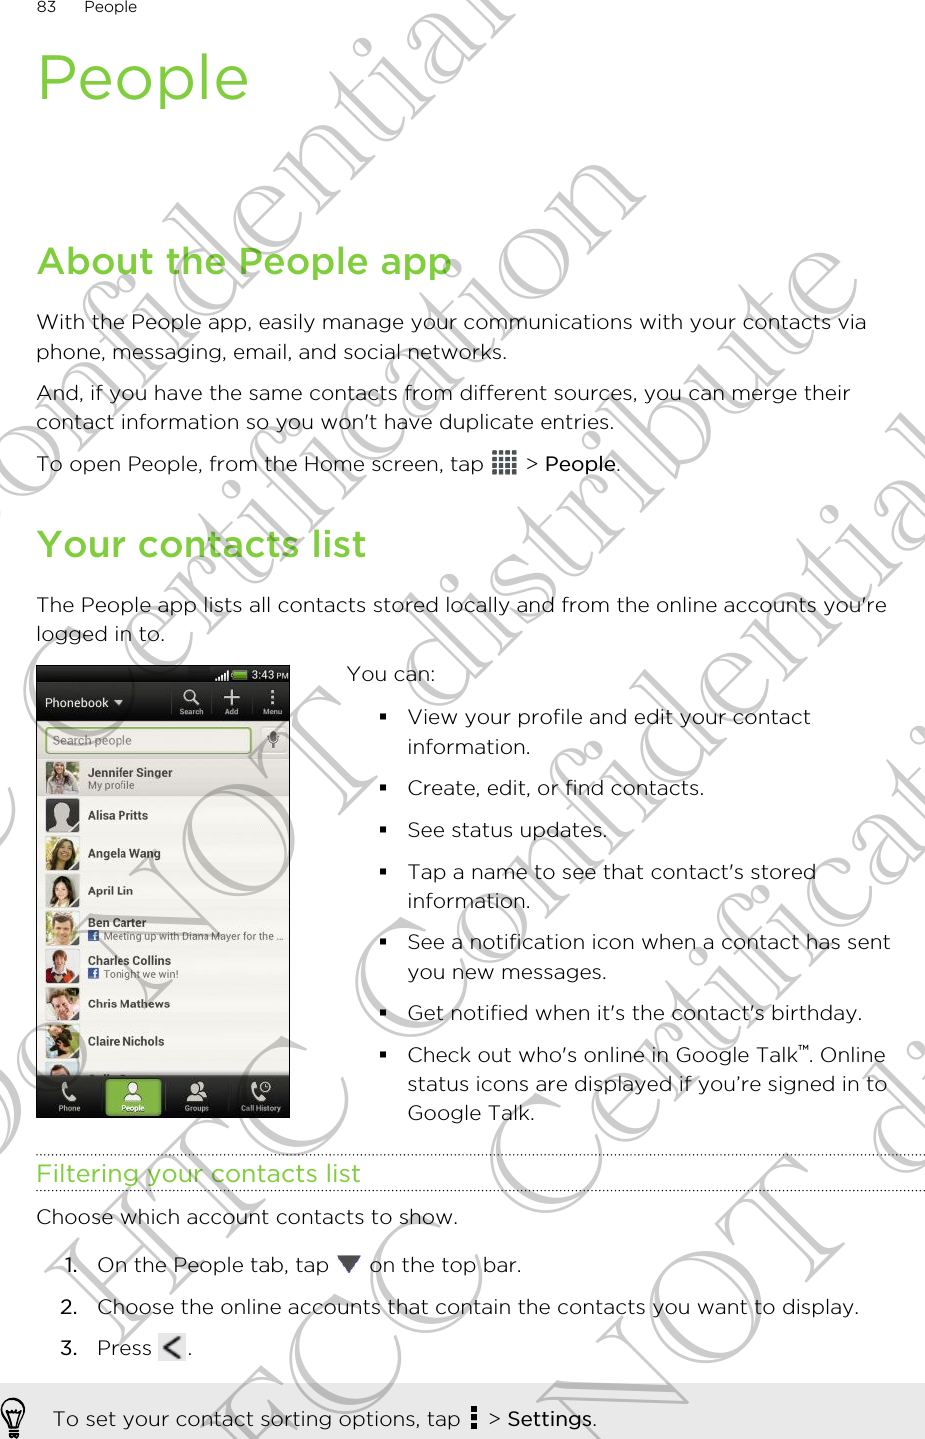 PeopleAbout the People appWith the People app, easily manage your communications with your contacts viaphone, messaging, email, and social networks.And, if you have the same contacts from different sources, you can merge theircontact information so you won&apos;t have duplicate entries.To open People, from the Home screen, tap   &gt; People.Your contacts listThe People app lists all contacts stored locally and from the online accounts you&apos;relogged in to.You can:§View your profile and edit your contactinformation.§Create, edit, or find contacts.§See status updates.§Tap a name to see that contact&apos;s storedinformation.§See a notification icon when a contact has sentyou new messages.§Get notified when it&apos;s the contact&apos;s birthday.§Check out who&apos;s online in Google Talk™. Onlinestatus icons are displayed if you’re signed in toGoogle Talk.Filtering your contacts listChoose which account contacts to show.1. On the People tab, tap   on the top bar.2. Choose the online accounts that contain the contacts you want to display.3. Press  .To set your contact sorting options, tap   &gt; Settings.83 PeopleHTC Confidential FCC Certification Do NOT distribute HTC Confidential FCC Certification Do NOT distribute